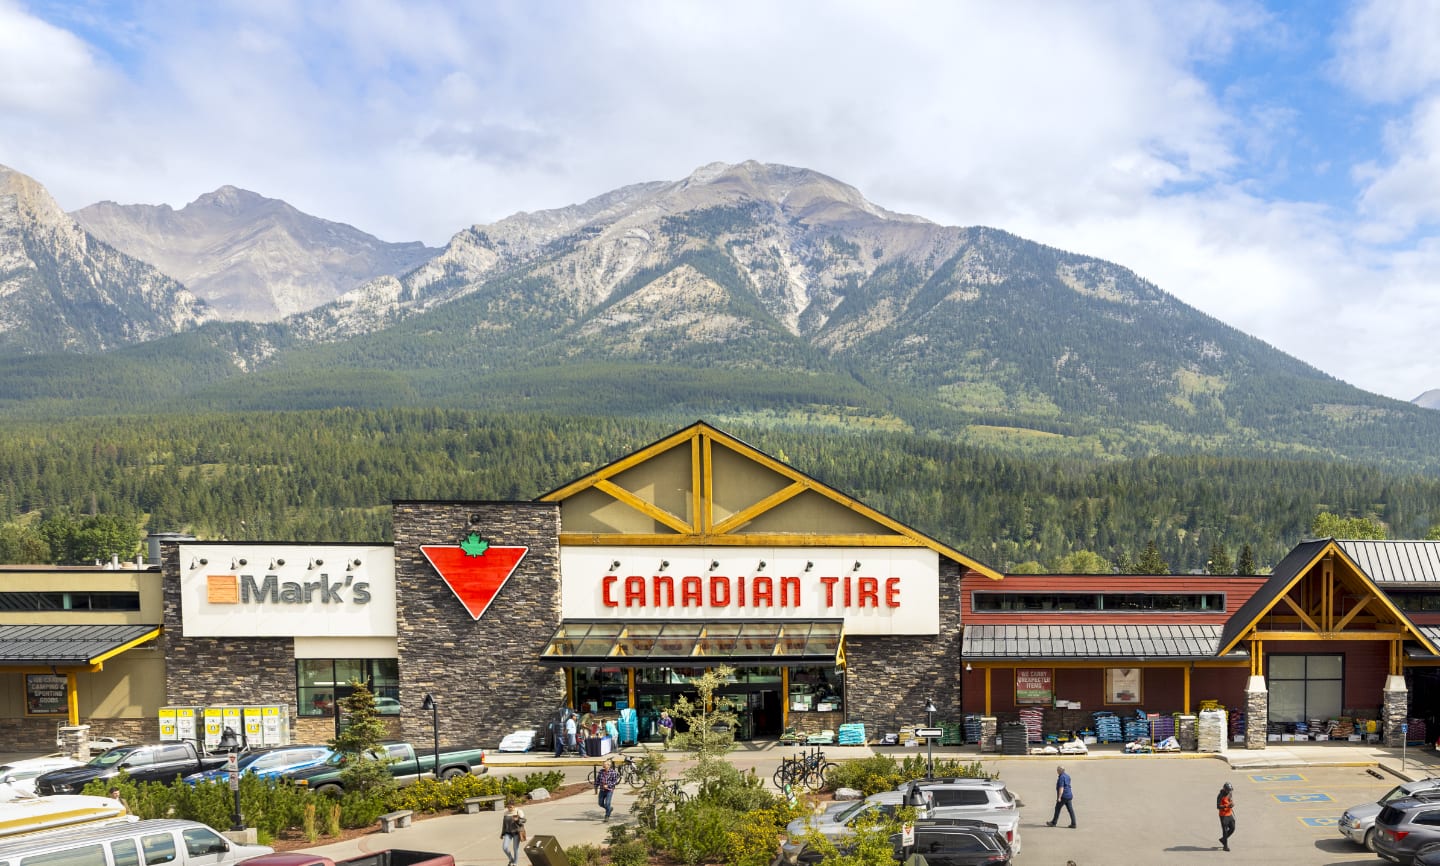 A Canadian Tire and Mark’s store side by side in a mountainous landscape in Canmore, Alberta.